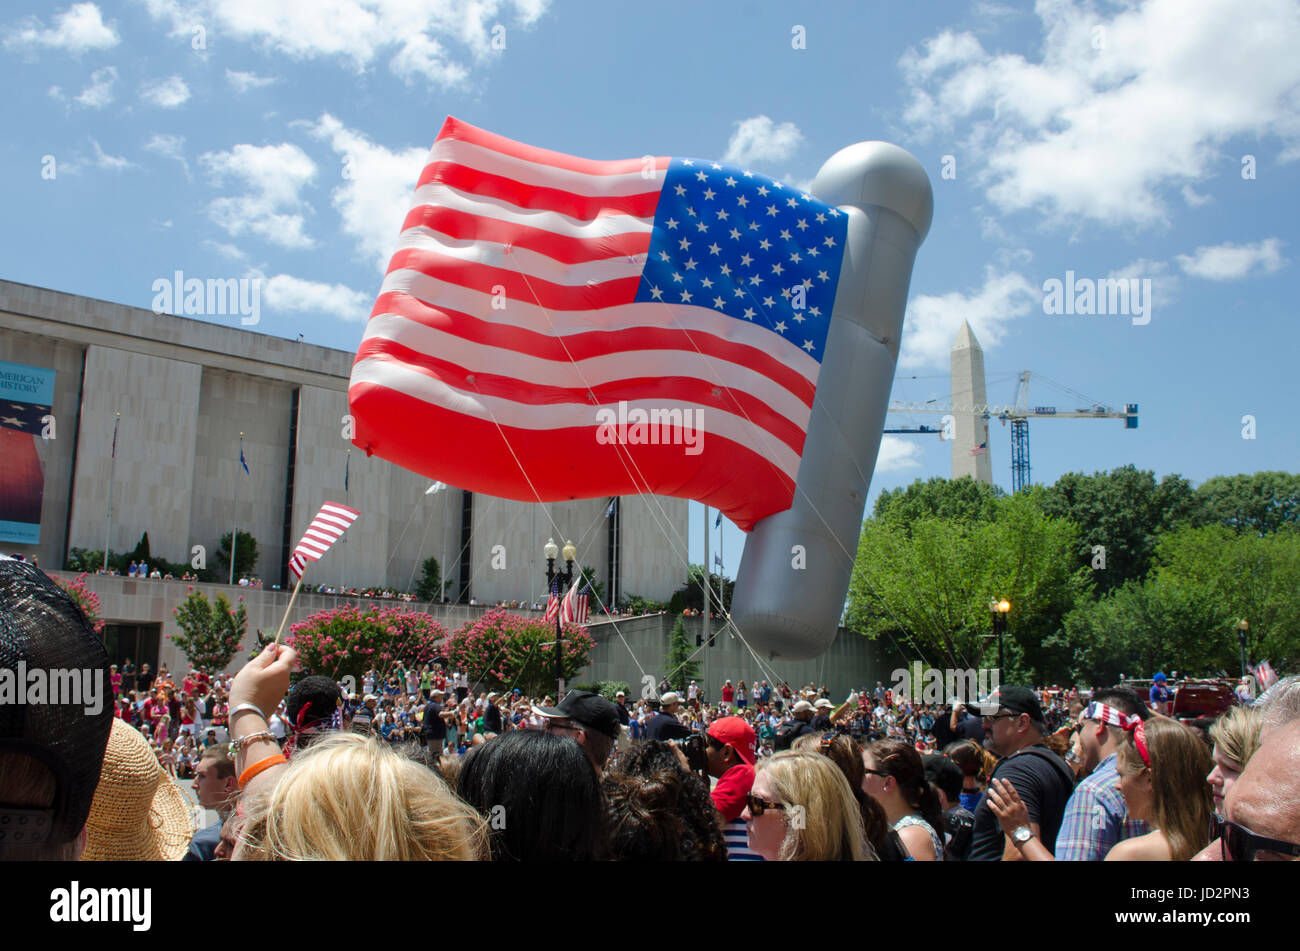 At the Independence Day parade, Consitution Ave NW, Washington DC, July 4, 2014. Stock Photo